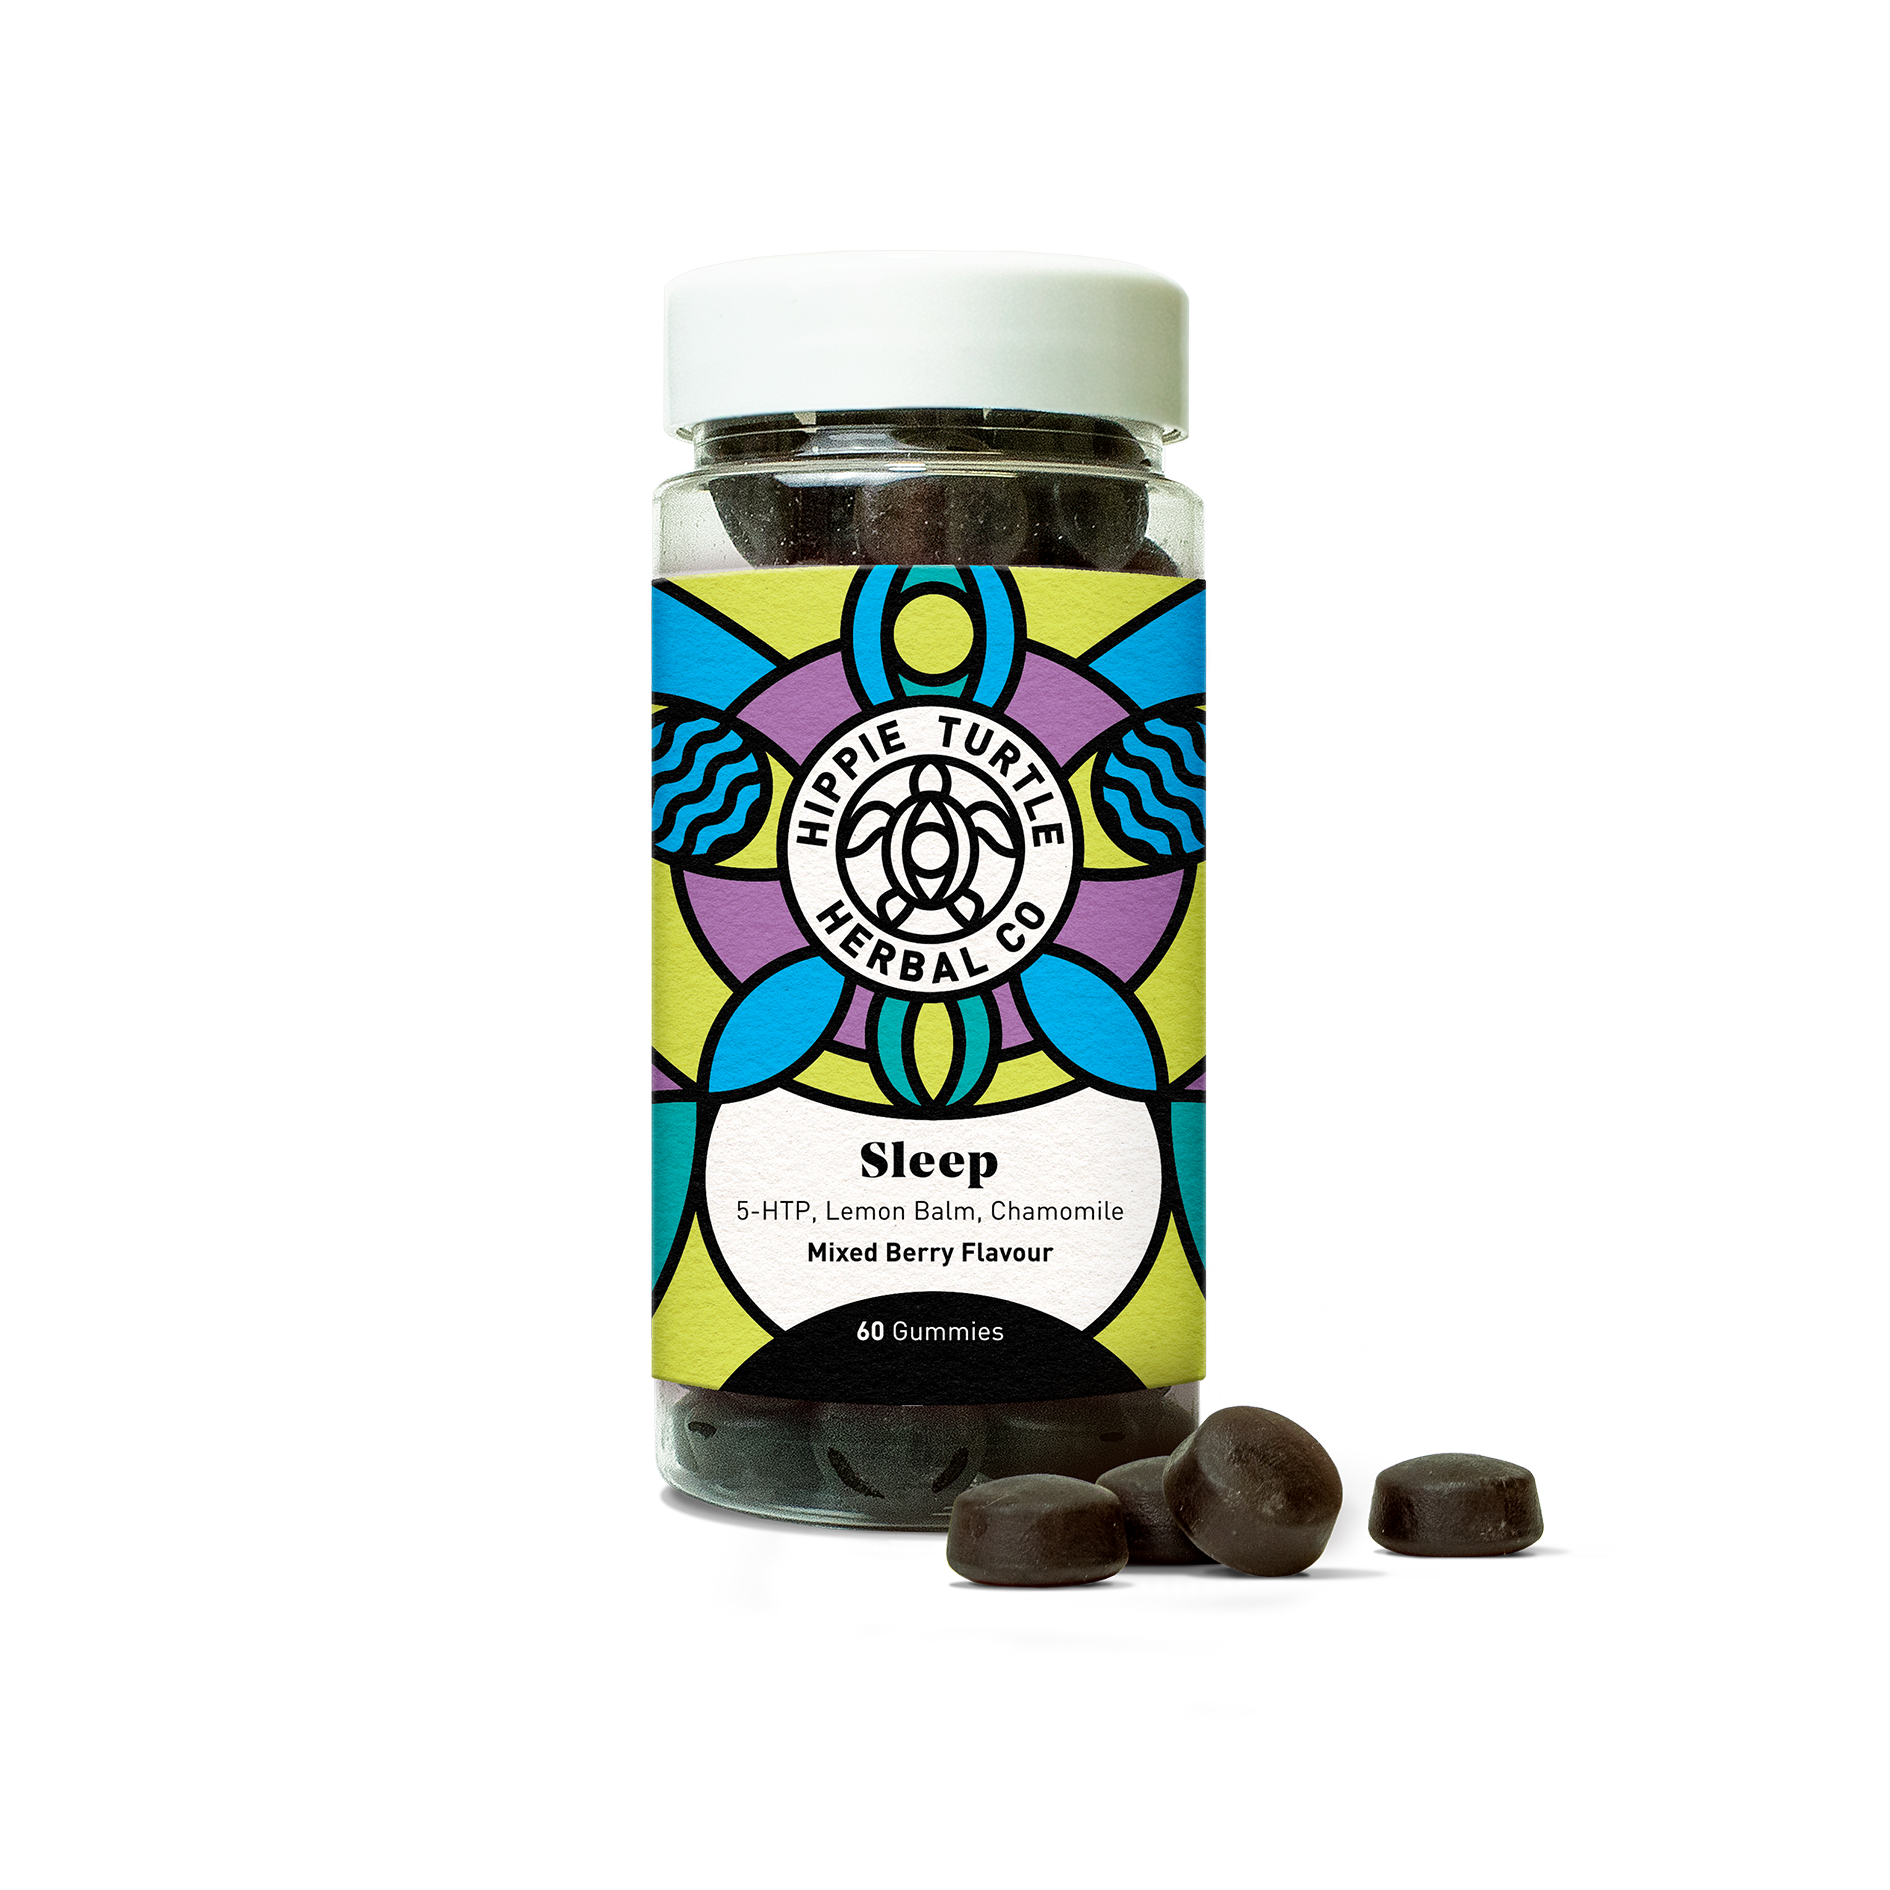 Chewable sleep support supplement in the form of nootropic gummies. Contains sleep promoting ingredients such as 5-HTP, zinc, chamomile and lemon balm.